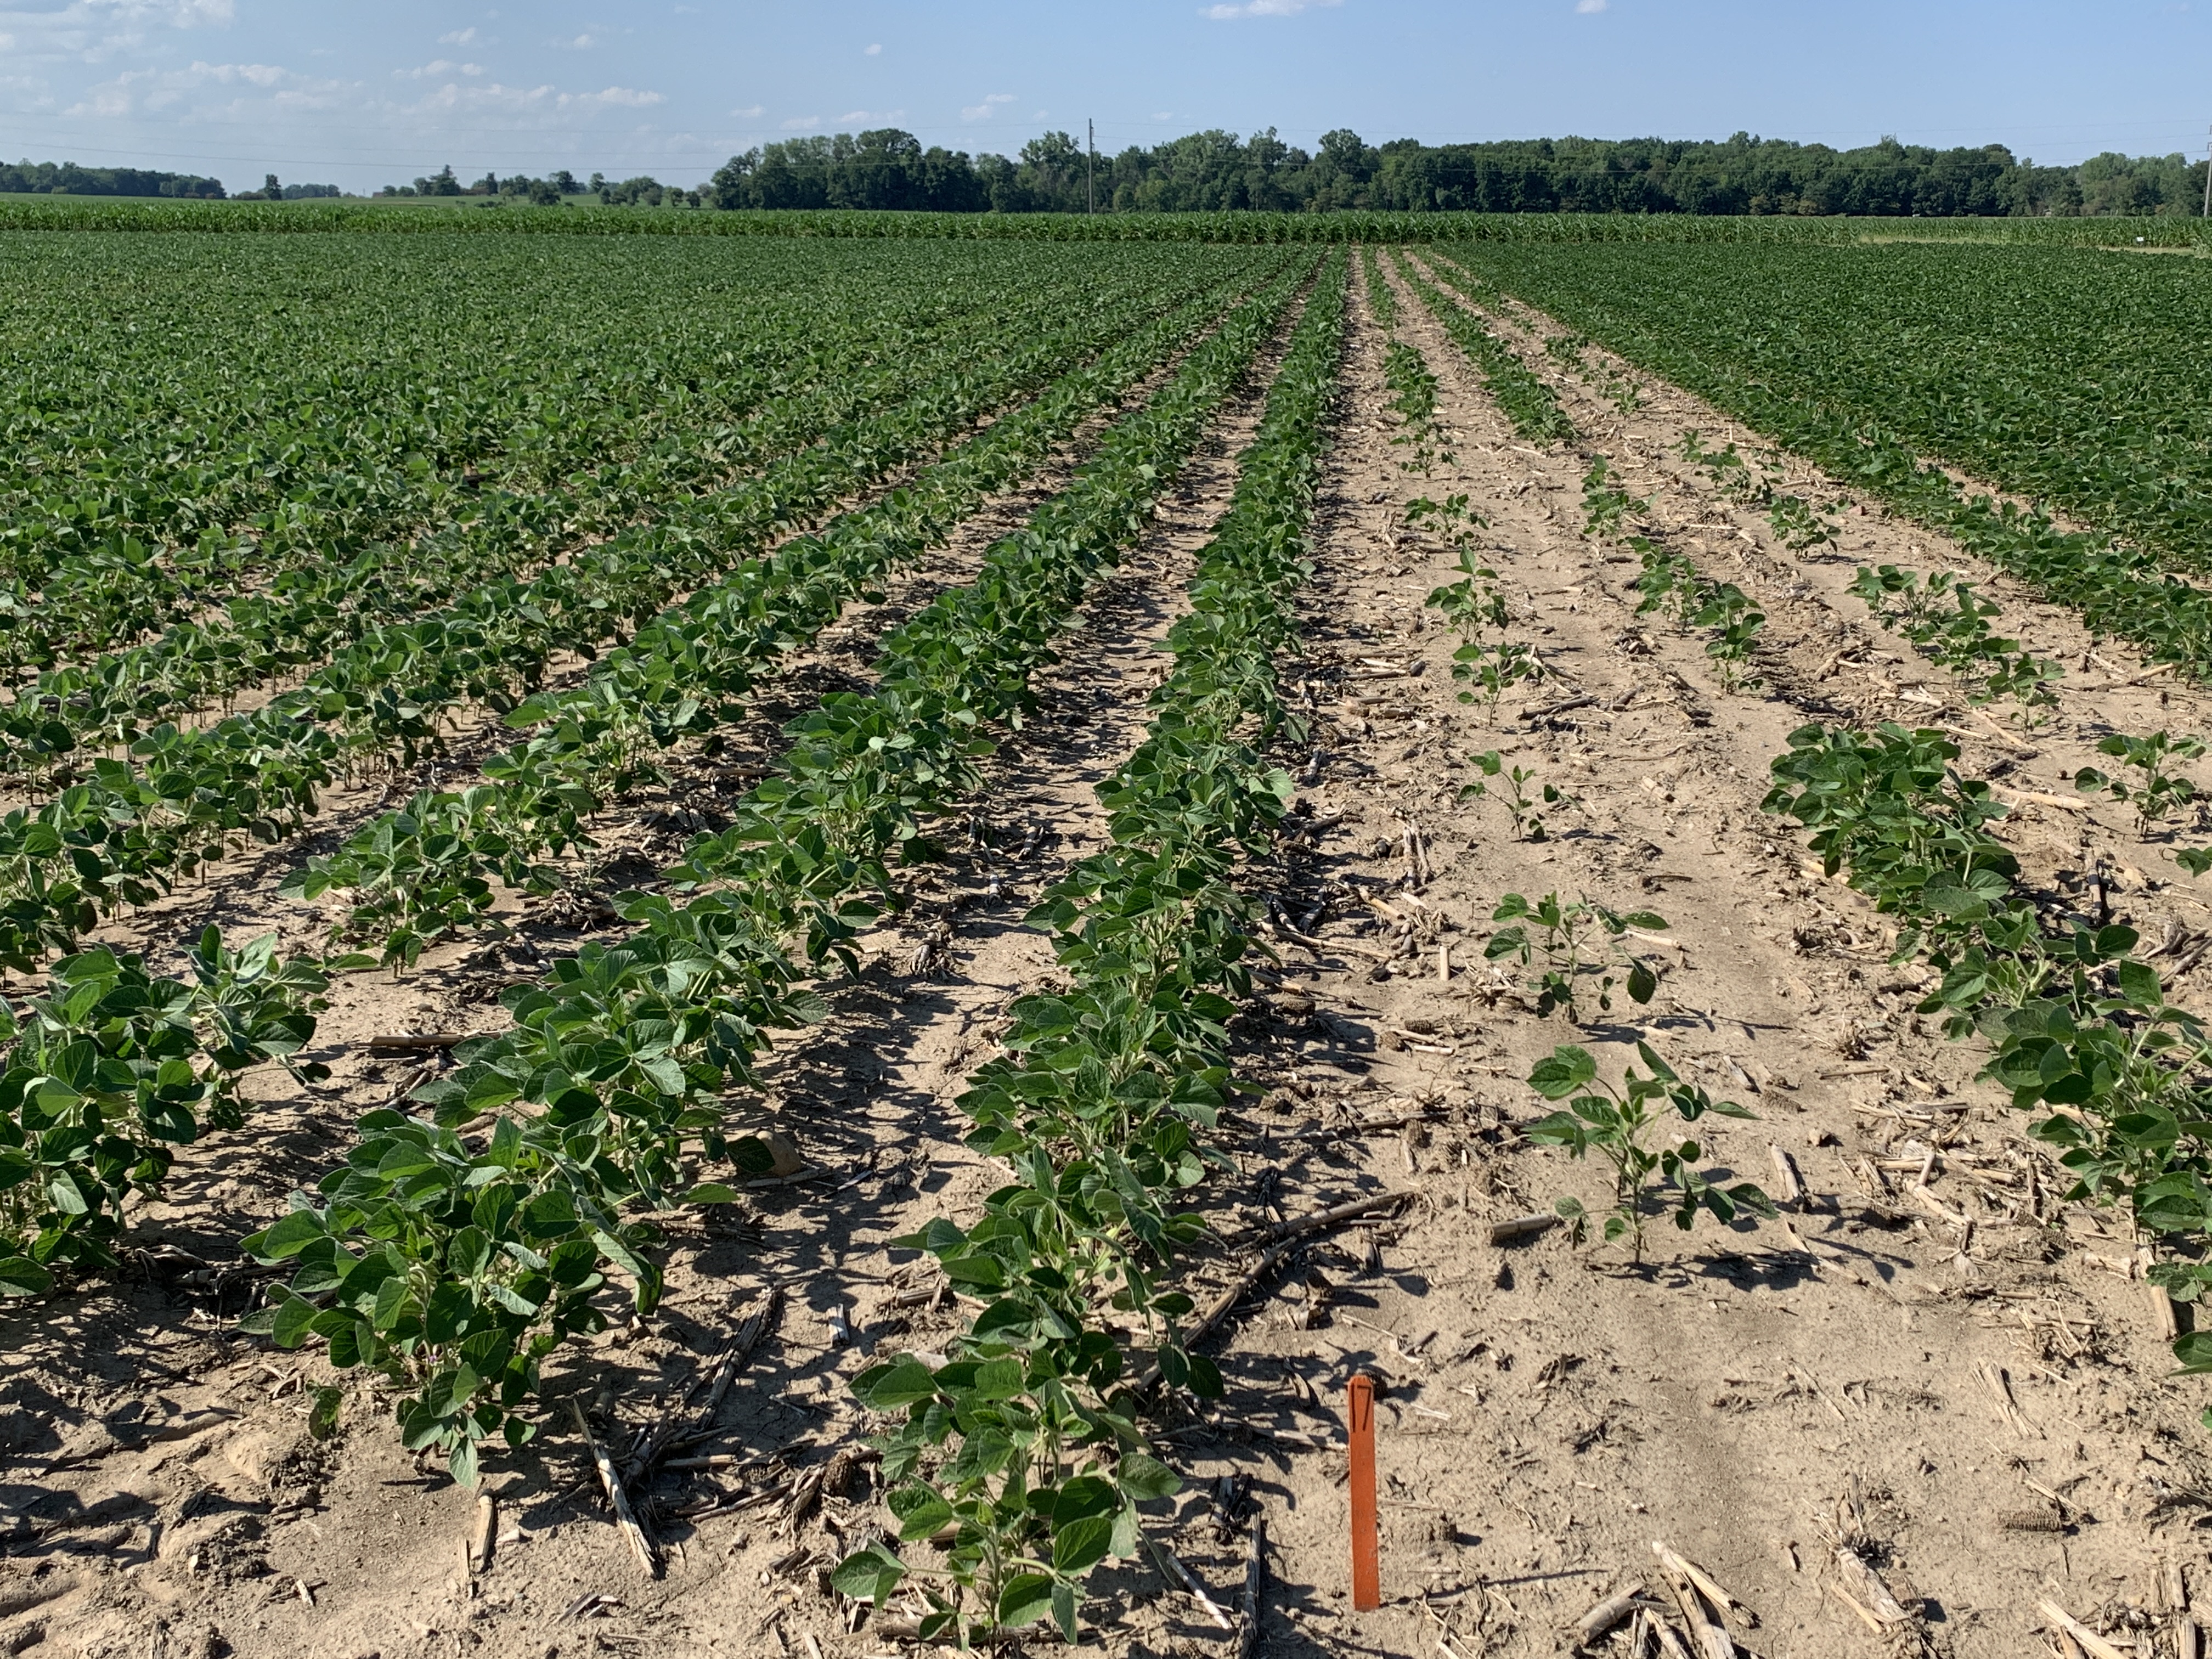 Plot research can compare treatment effects on soybean seed germination.